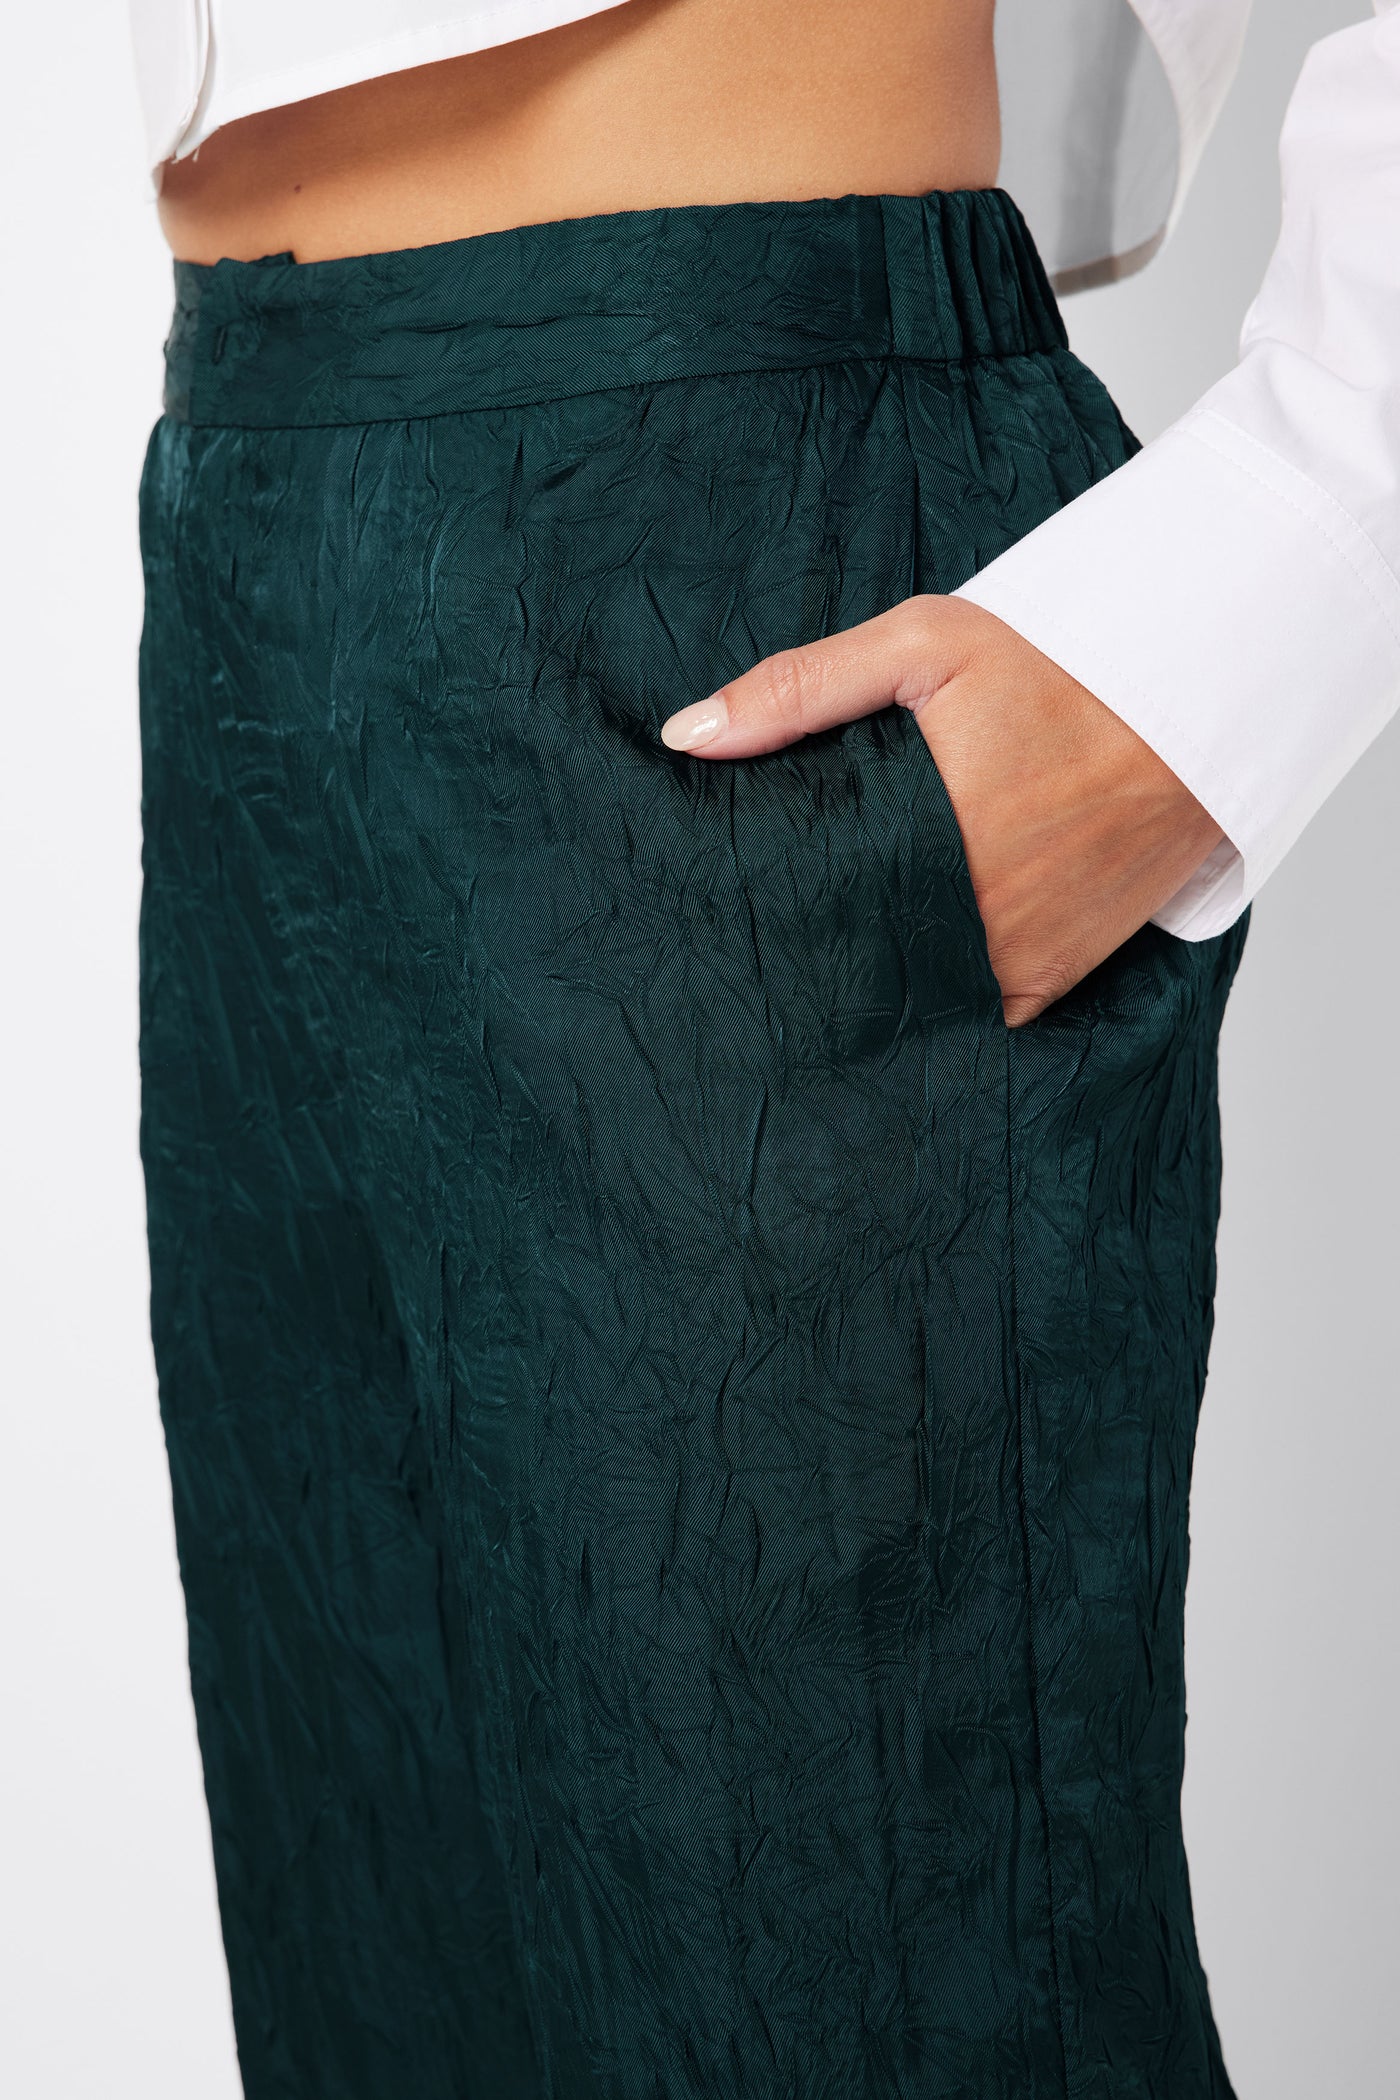 Eclipse Pant - Teal